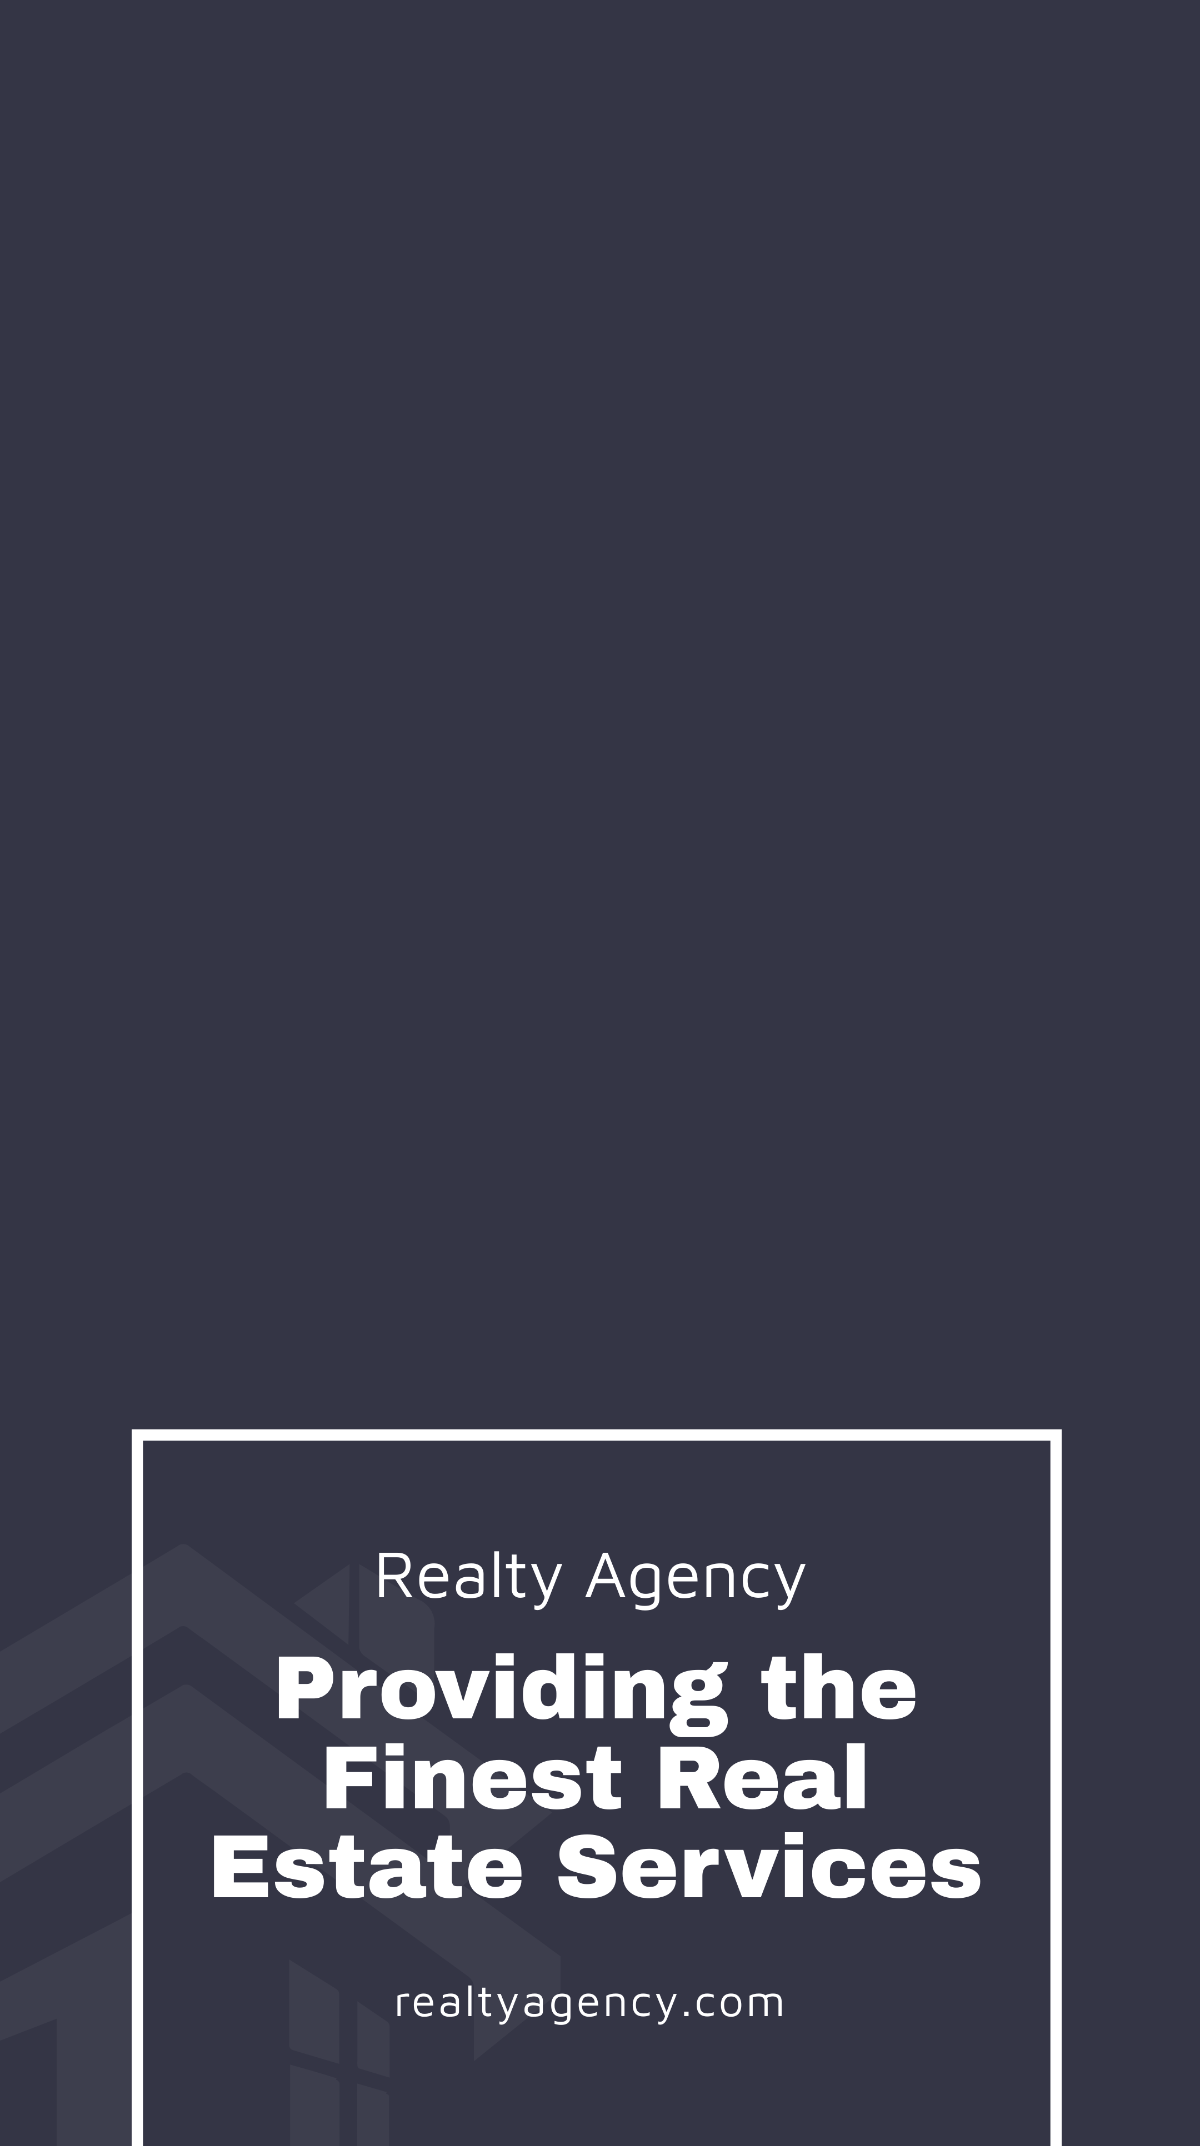 Real Estate Agency Snapchat Geofilter